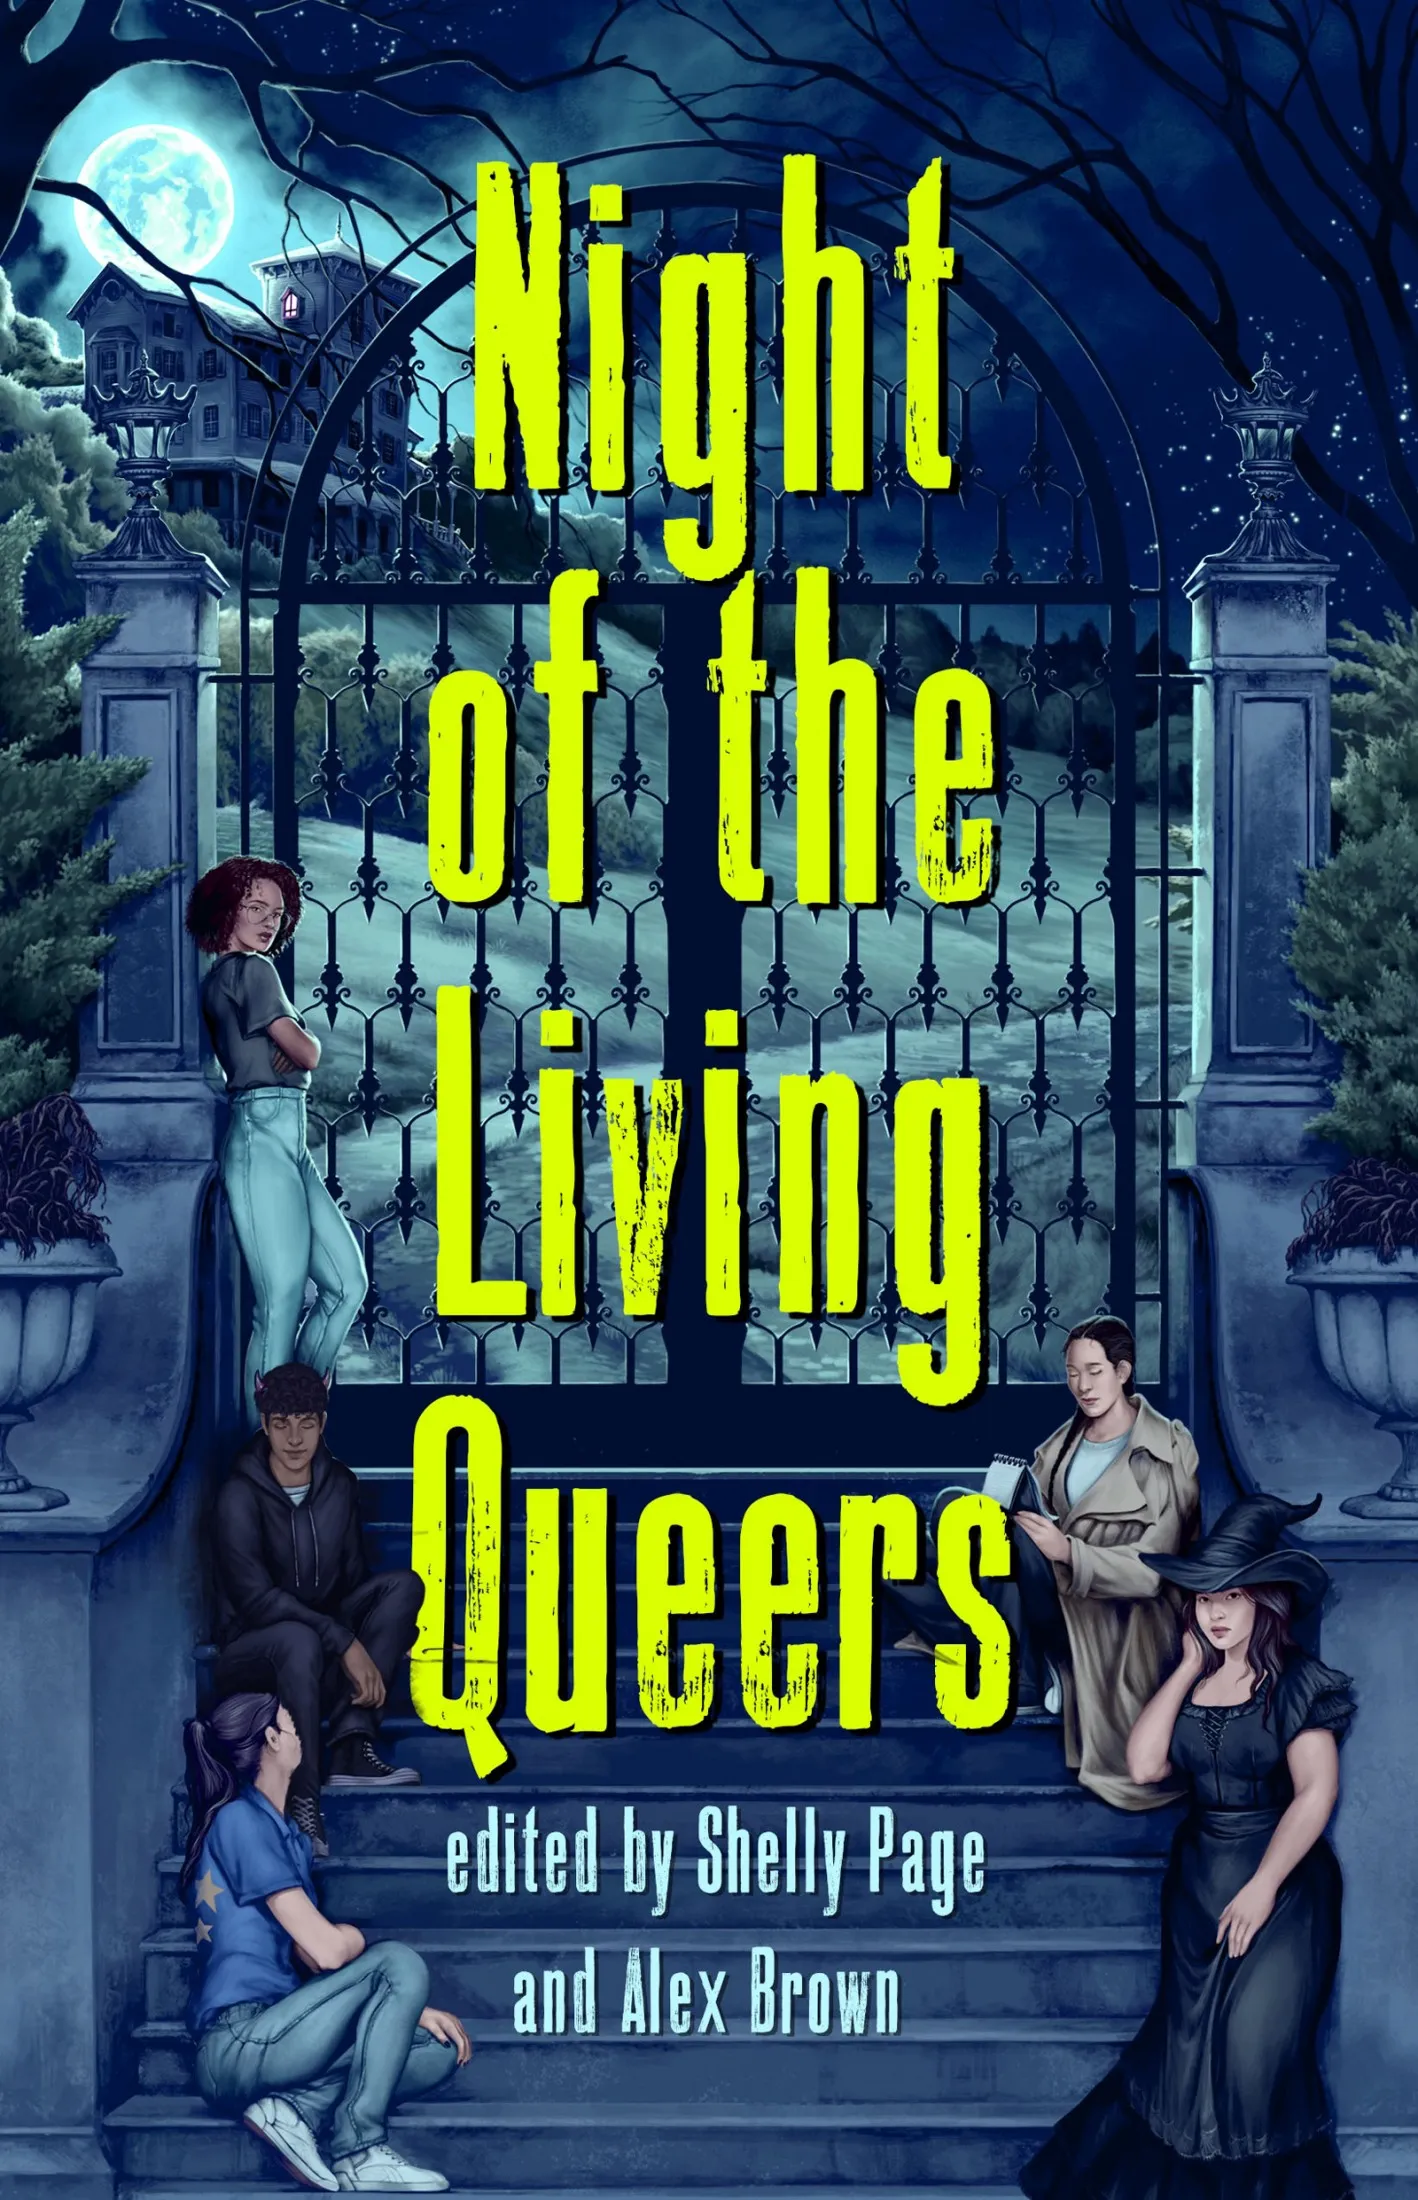 Night of the Living Queers: 13 Tales of Terror & Delight